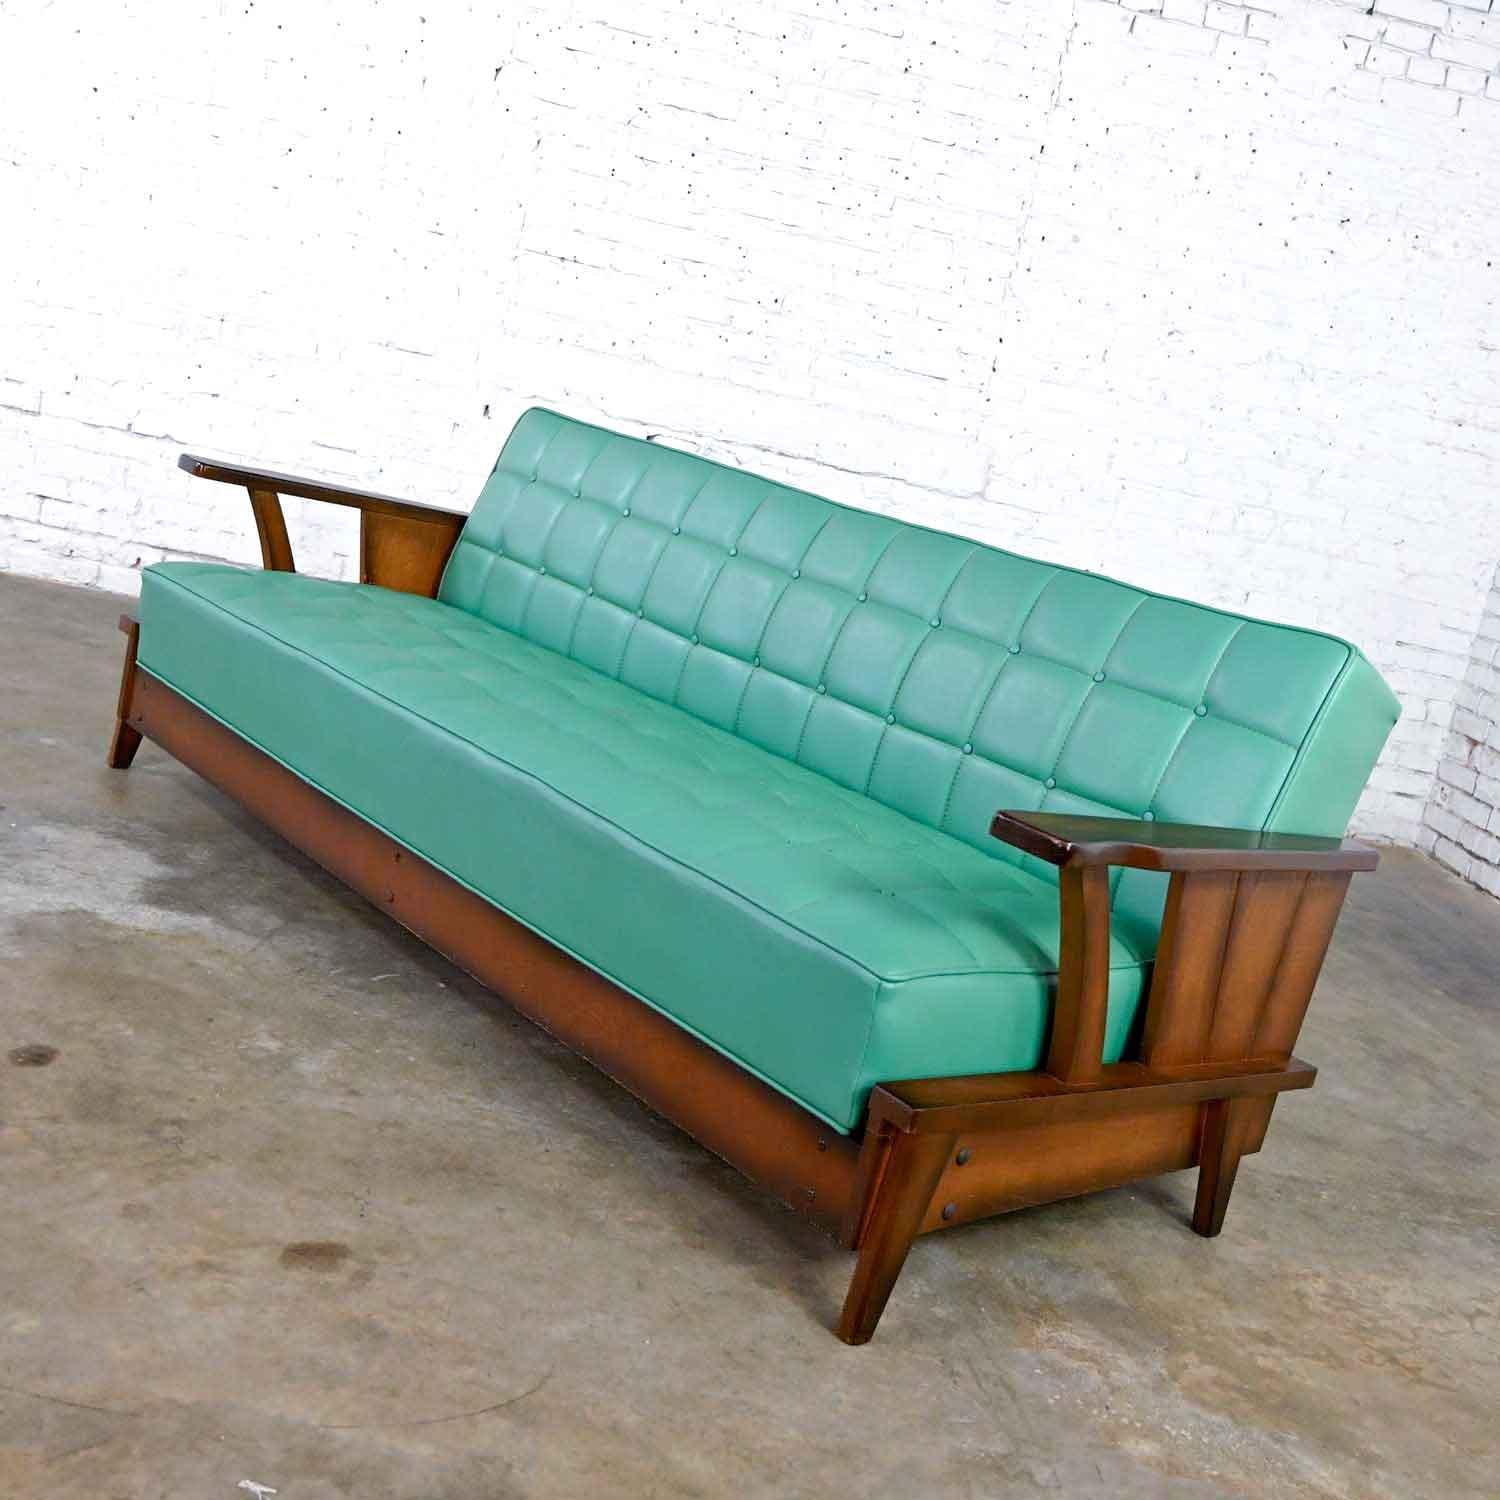 Gorgeous convertible sofa or daybed comprised of oak and original turquoise vinyl faux leather by Economy Furniture style of A. Brandt Ranch Oak. Age-appropriate condition, keeping in mind that this is vintage and not new so will have signs of use